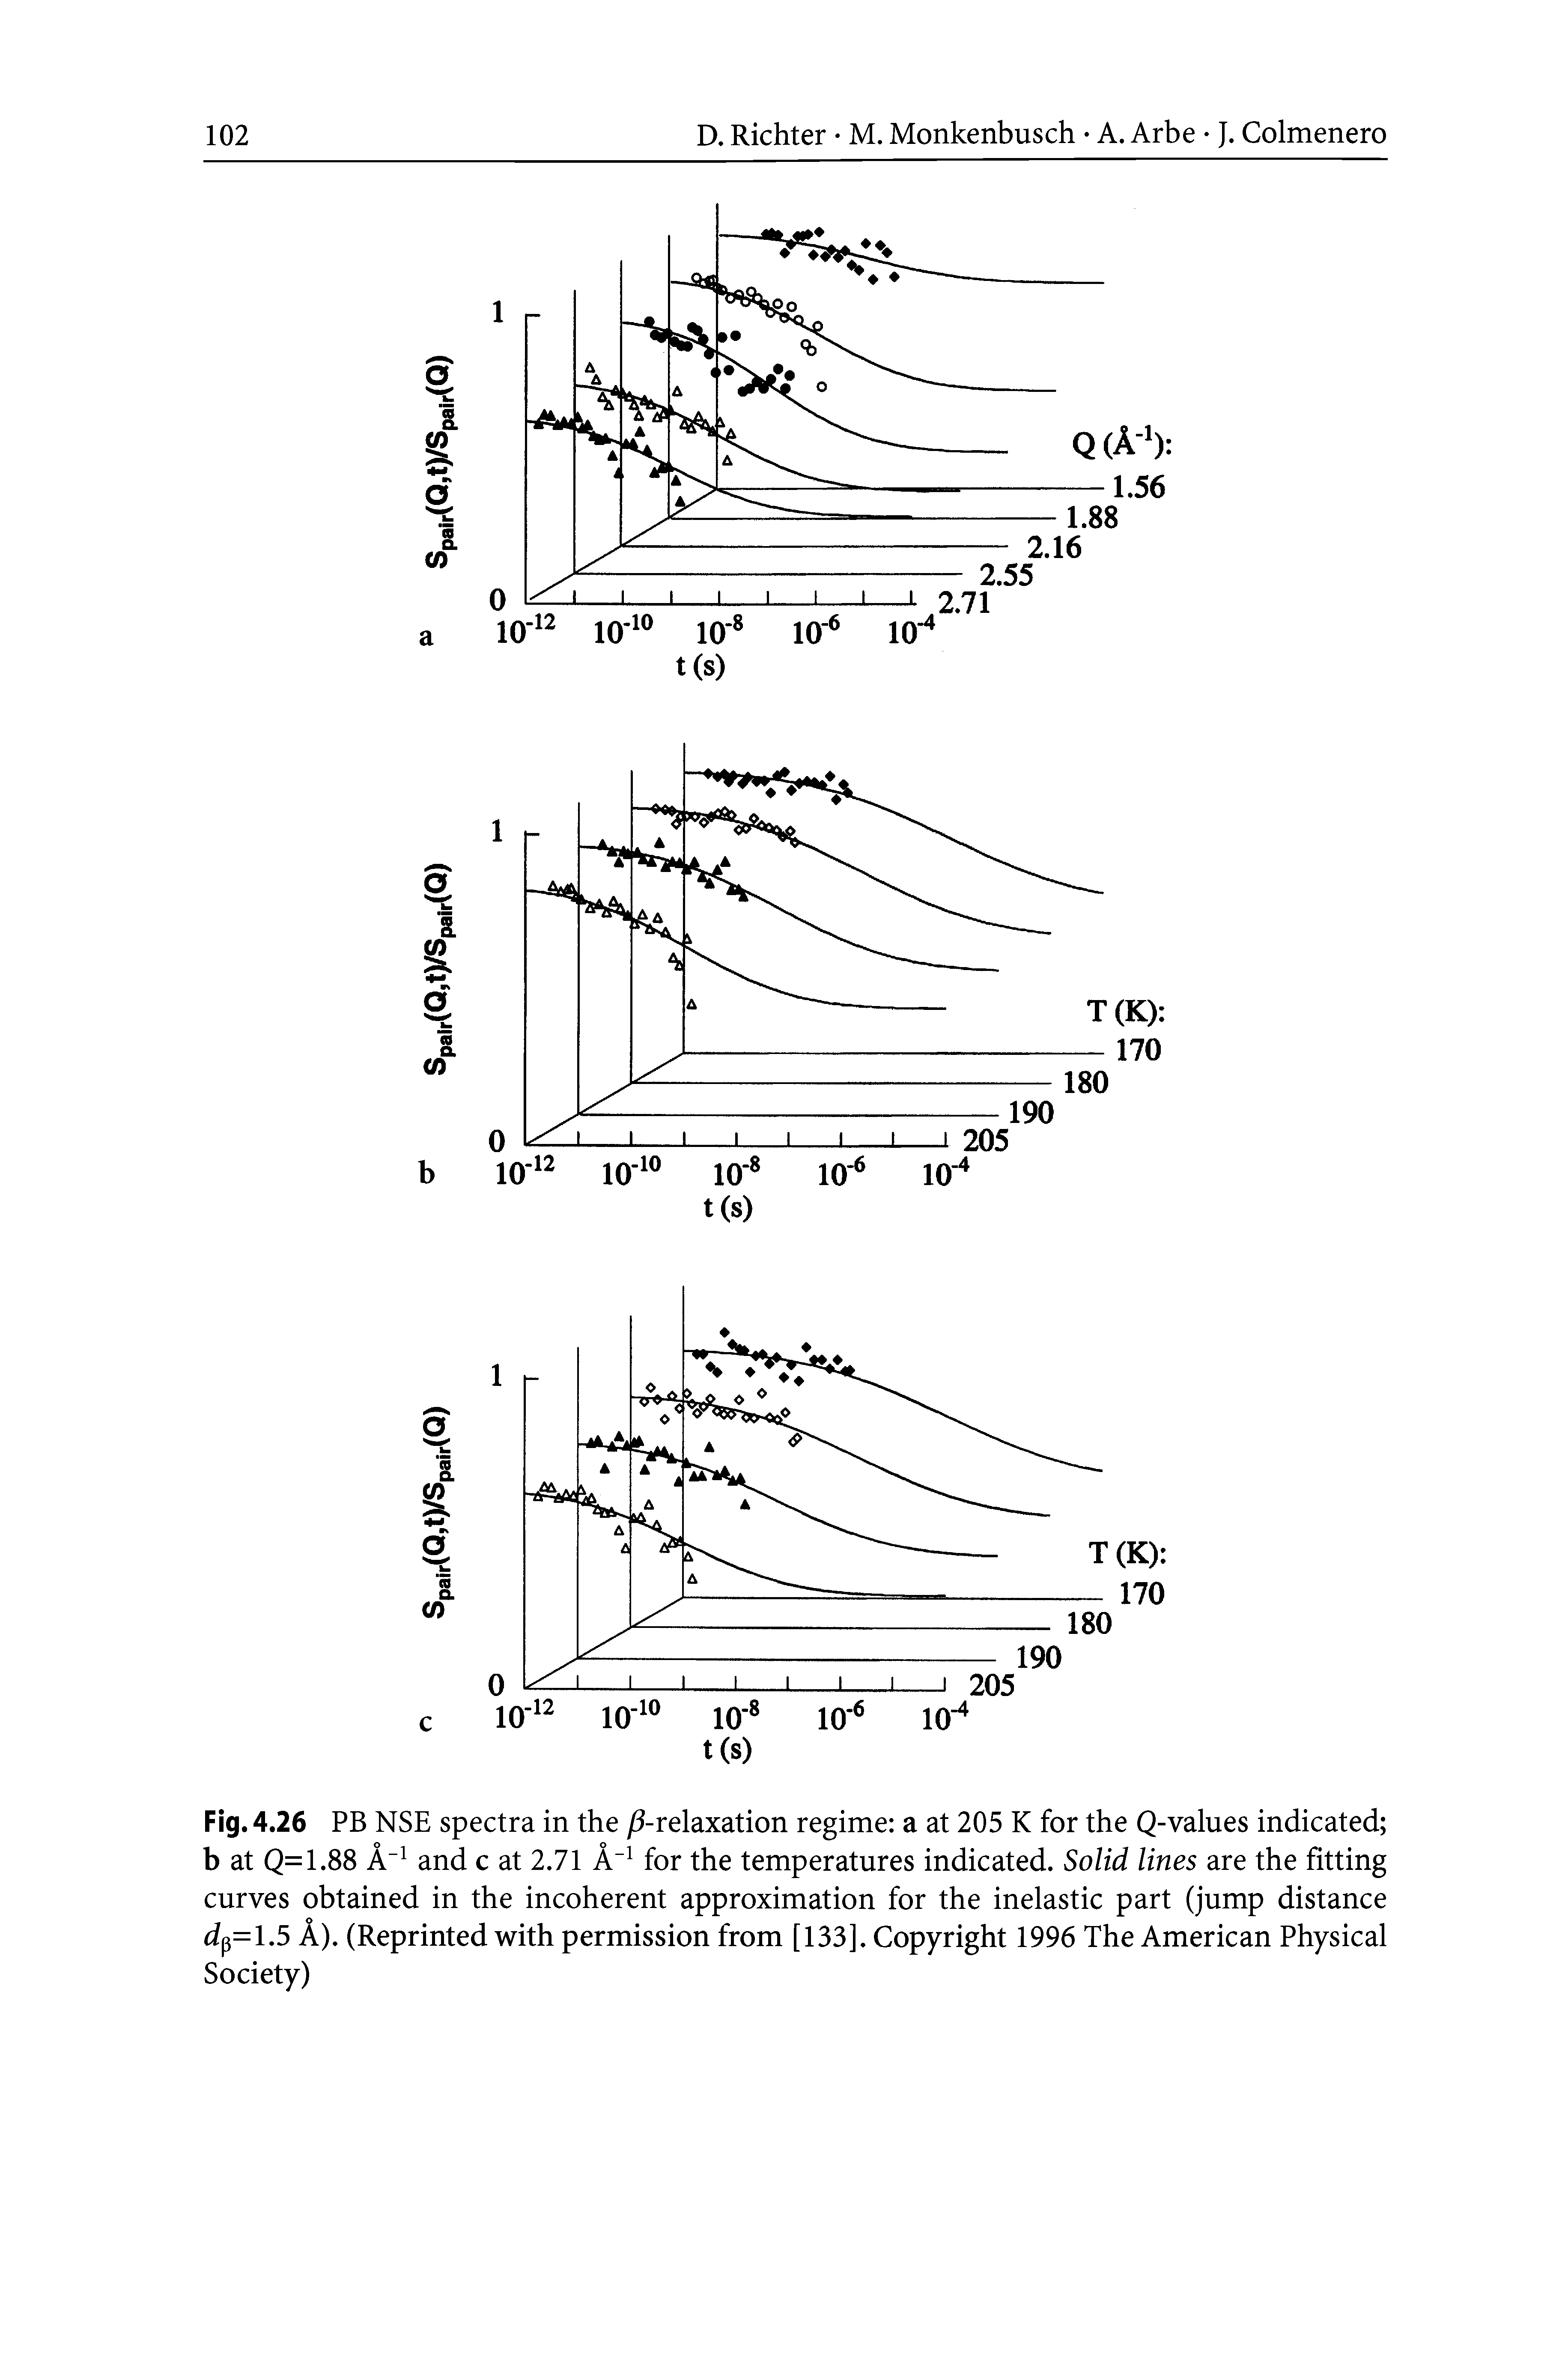 Fig. 4.26 PB NSE spectra in the -relaxation regime a at 205 K for the Q-values indicated b at Q=1.88 A and c at 2.71 A for the temperatures indicated. Solid lines are the fitting curves obtained in the incoherent approximation for the inelastic part (jump distance dp=1.5 A). (Reprinted with permission from [133]. Copyright 1996 The American Physical Society)...